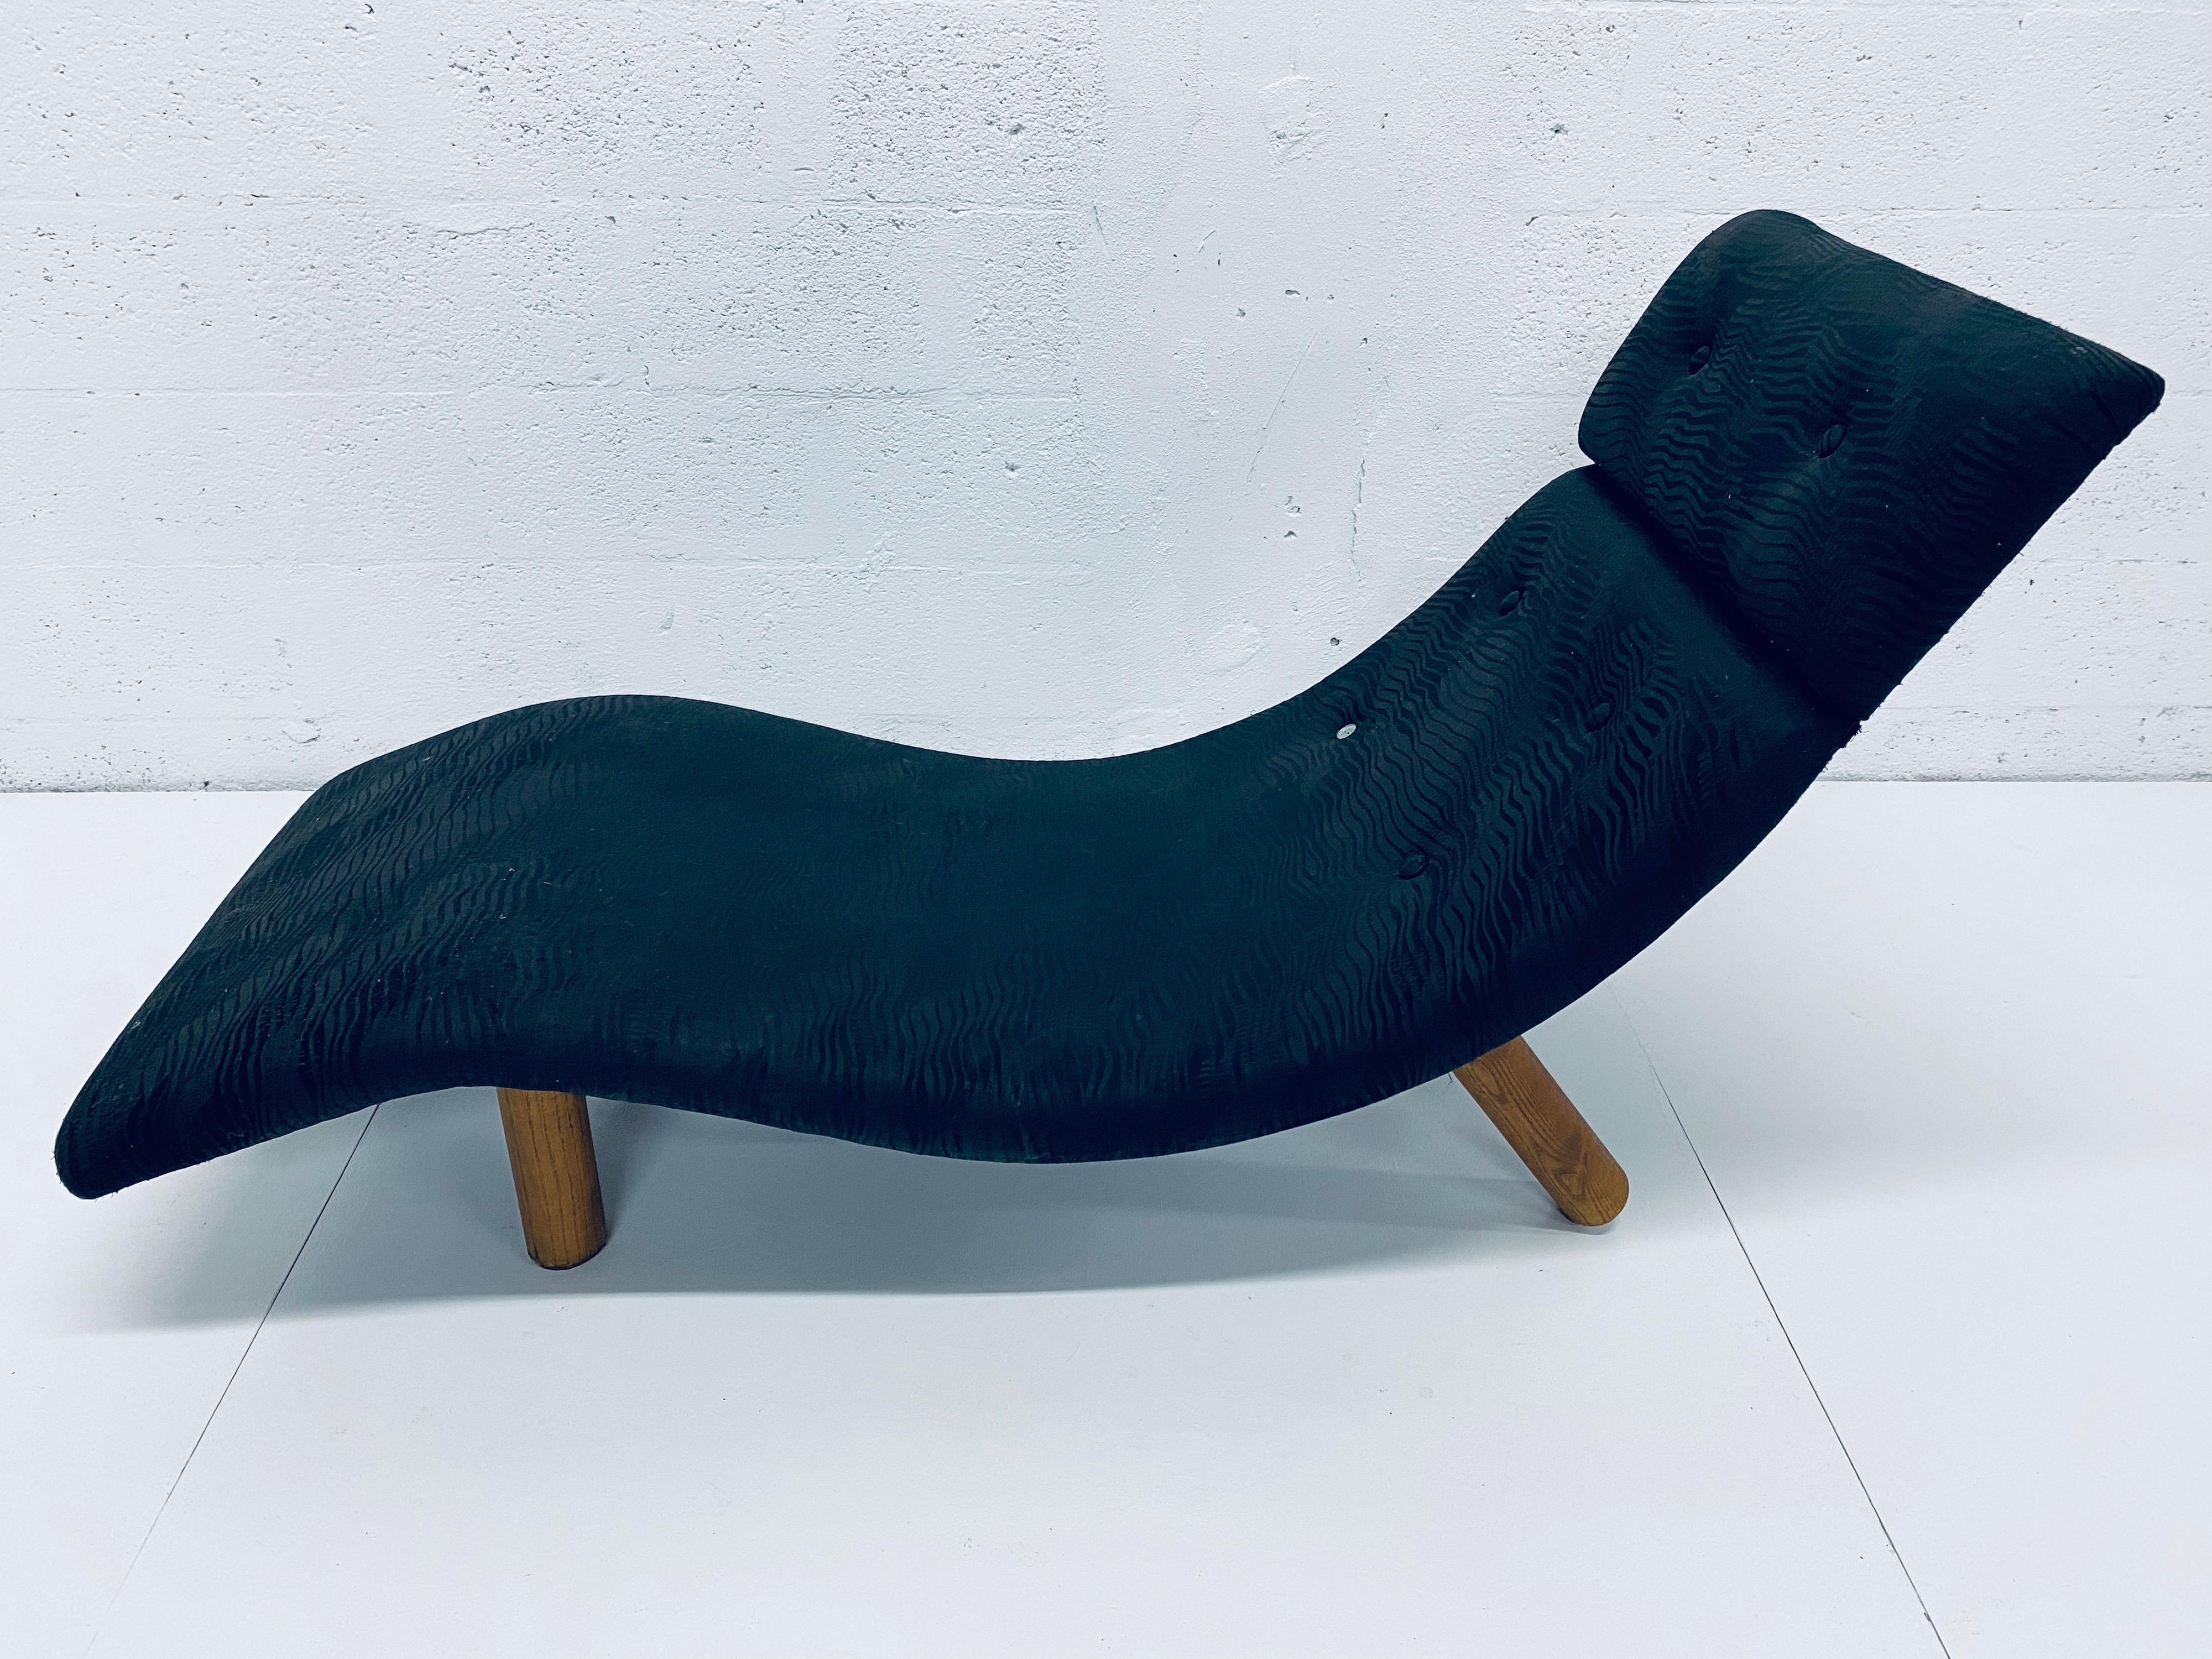 Original midcentury Enrico Barolini sculptural wave chaise lounge with birch legs from the 1970s. Ready for new upholstery.